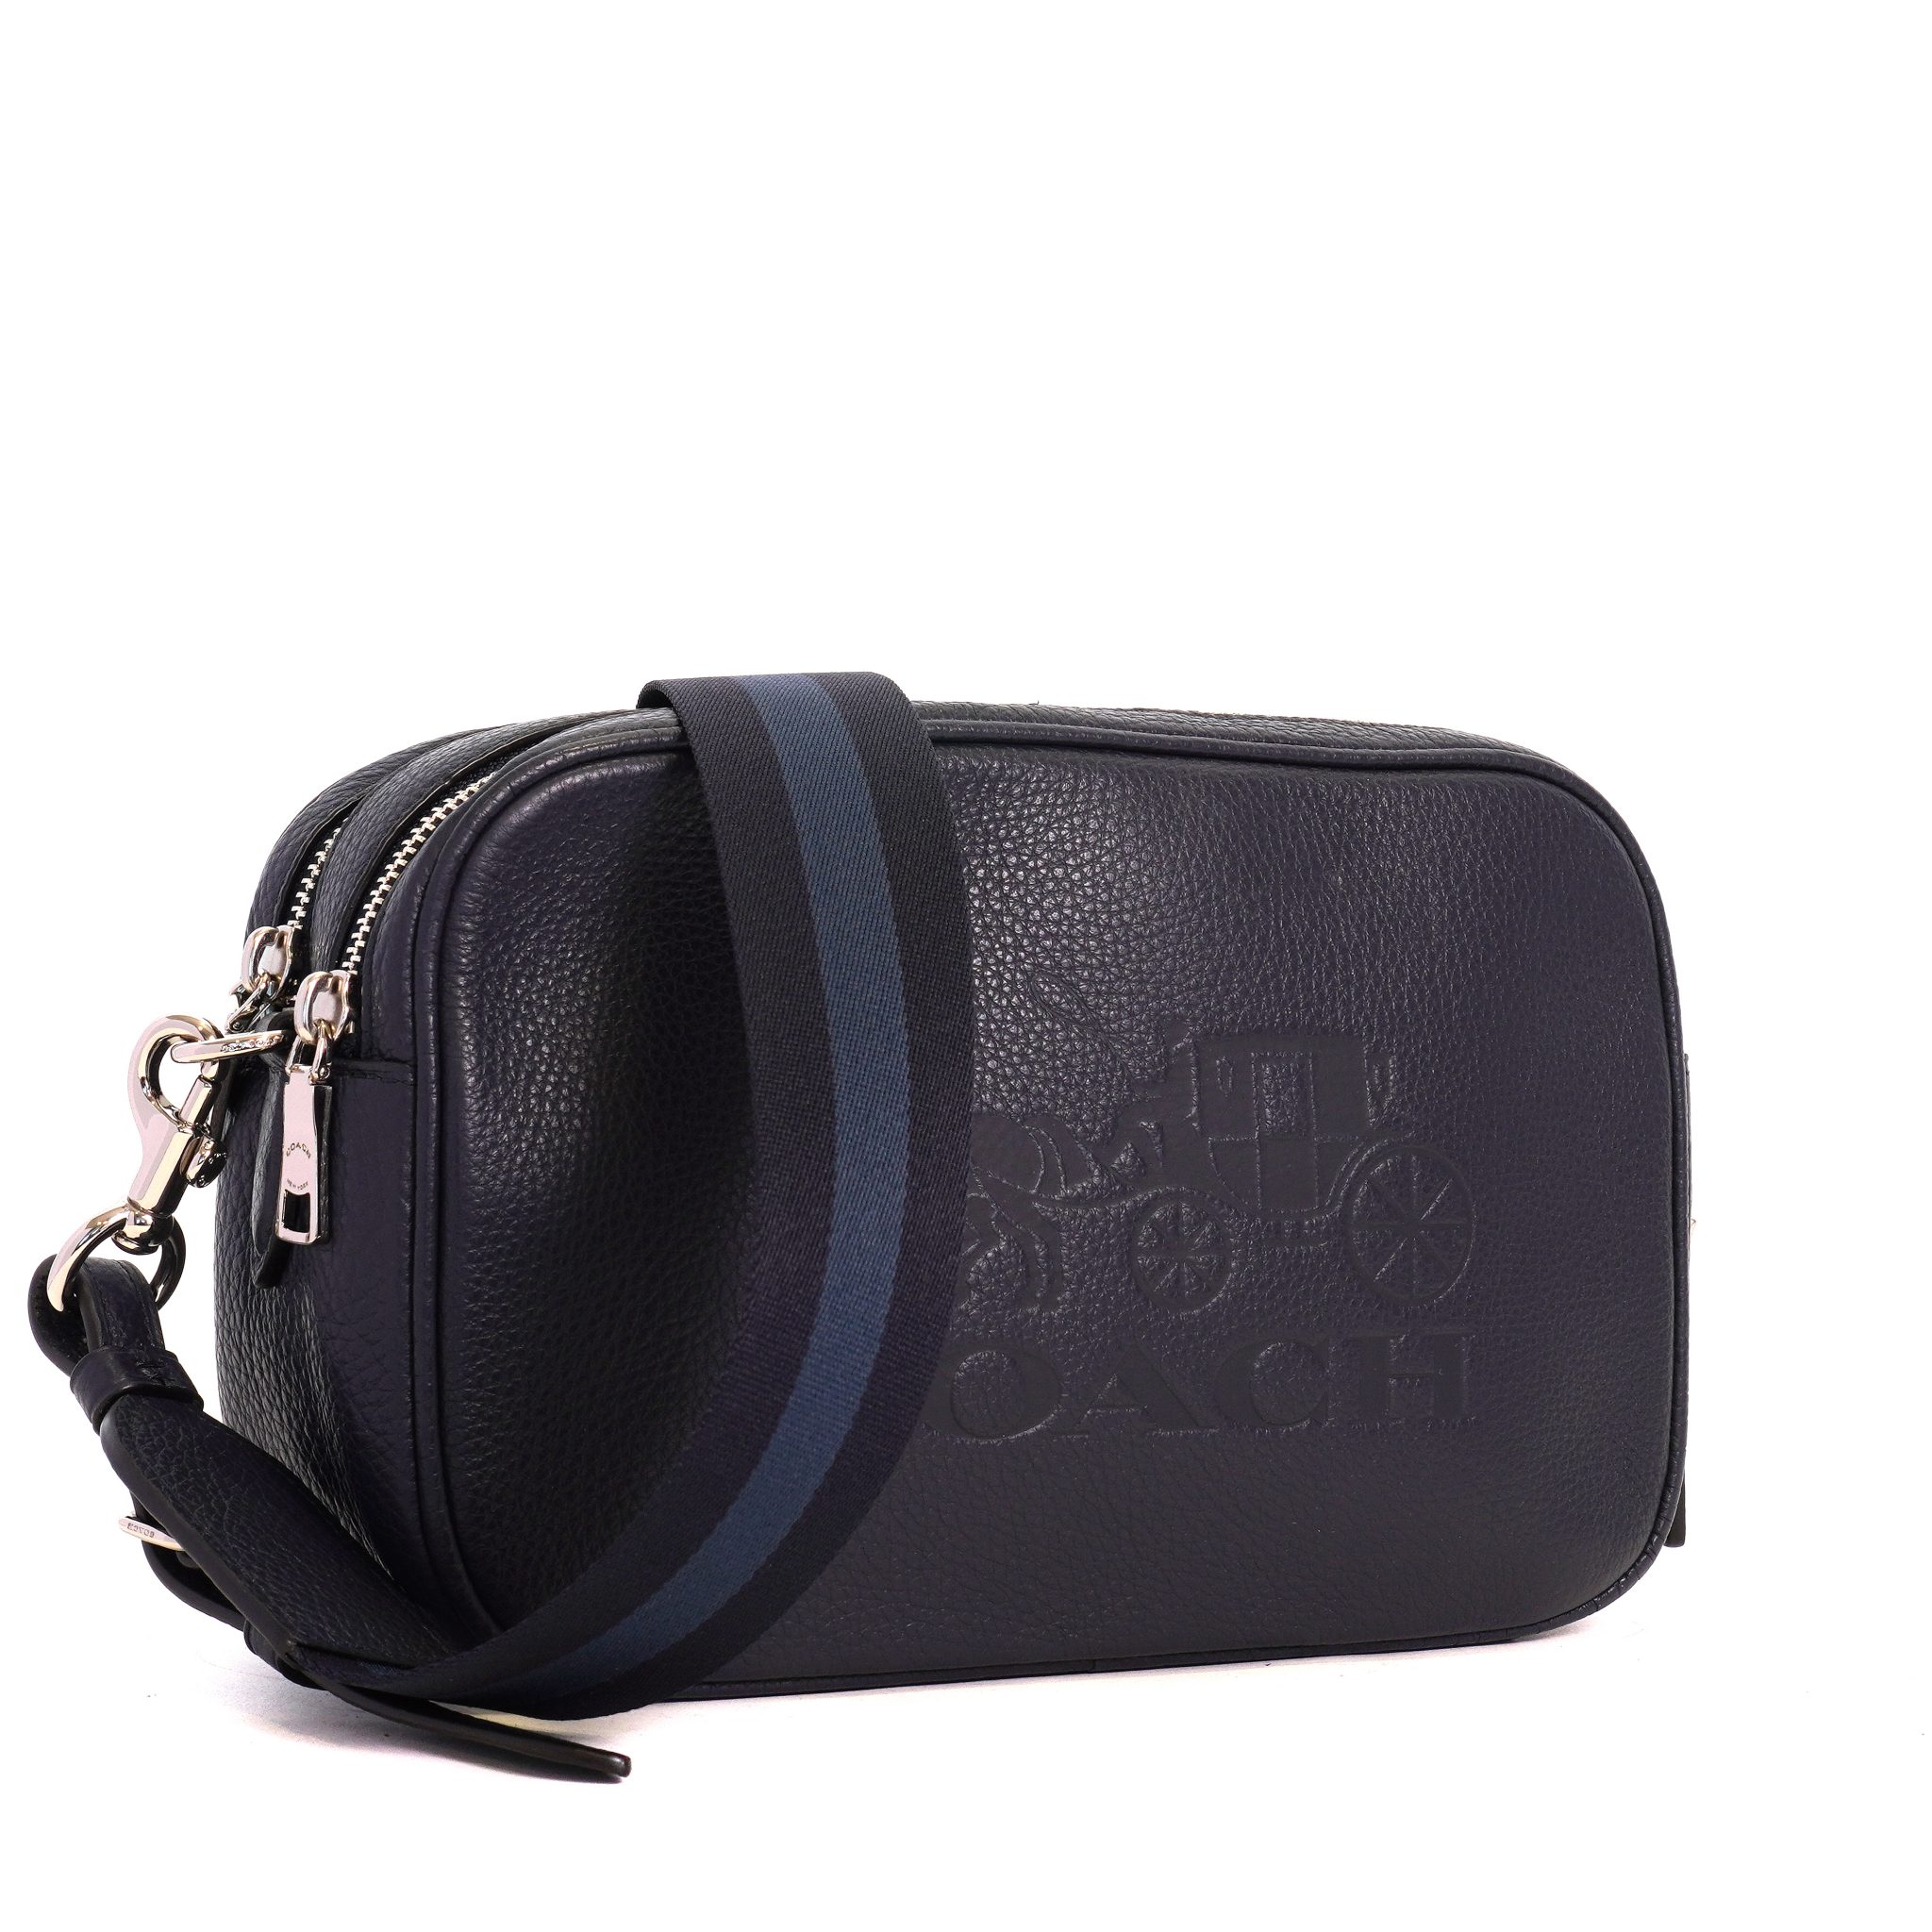 crossbody coach outlet online